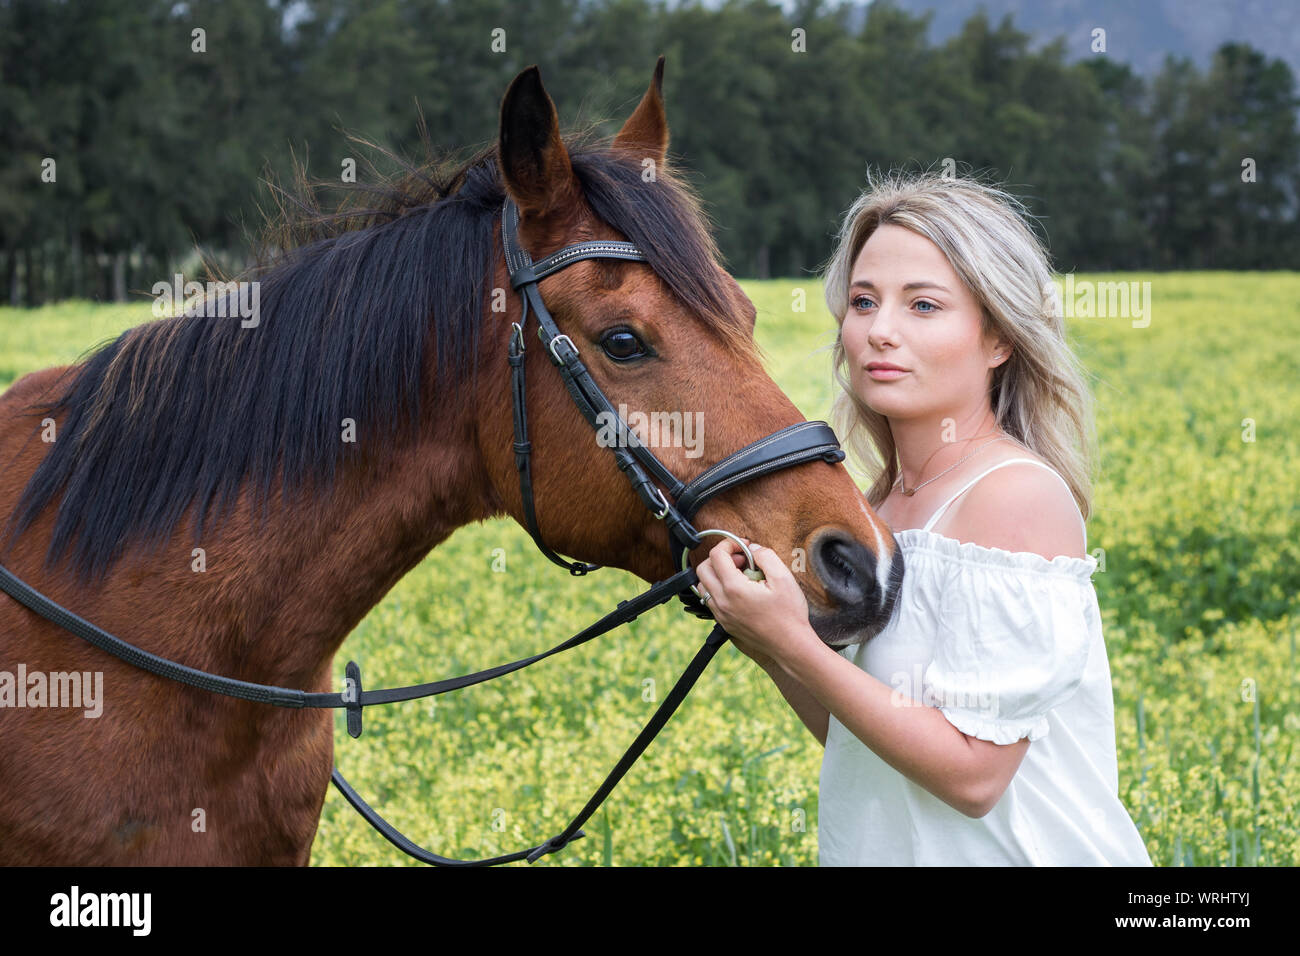 Woman standing next to her chestnut Arab horse outdoors with field of yellow flowers, looking away. Stock Photo